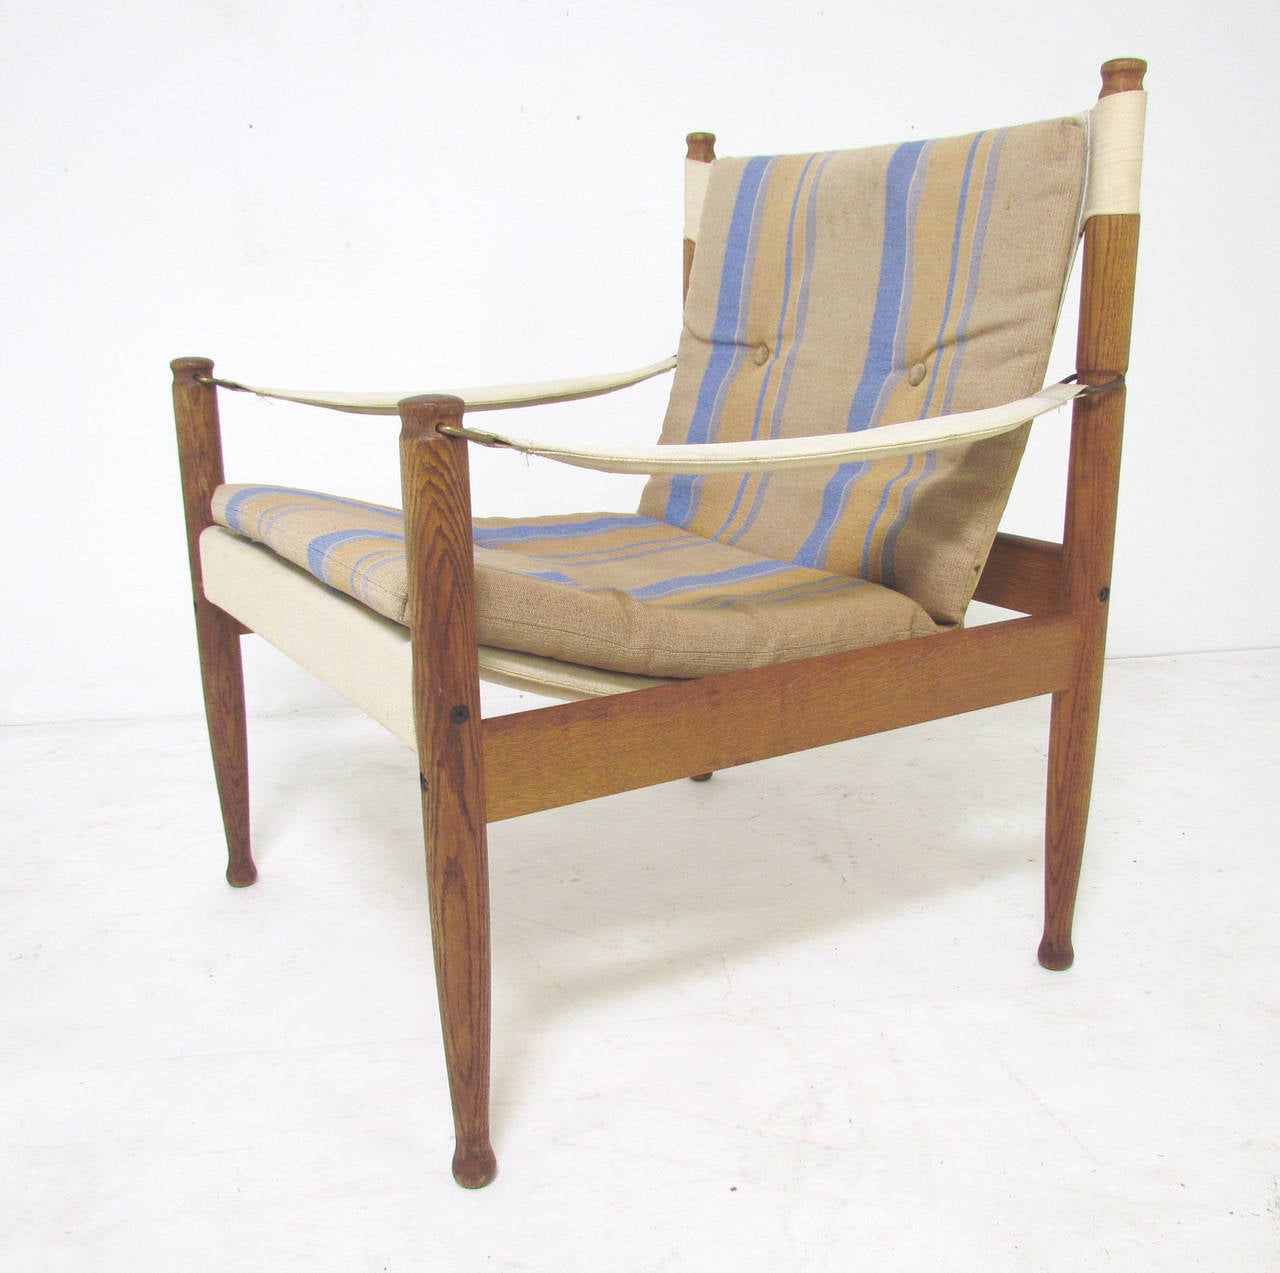 Pair of safari sling lounge chairs by Erik Wørts for Niels Eilersen, Denmark, circa 1960s. Original canvas slings, arms and seat cushions.